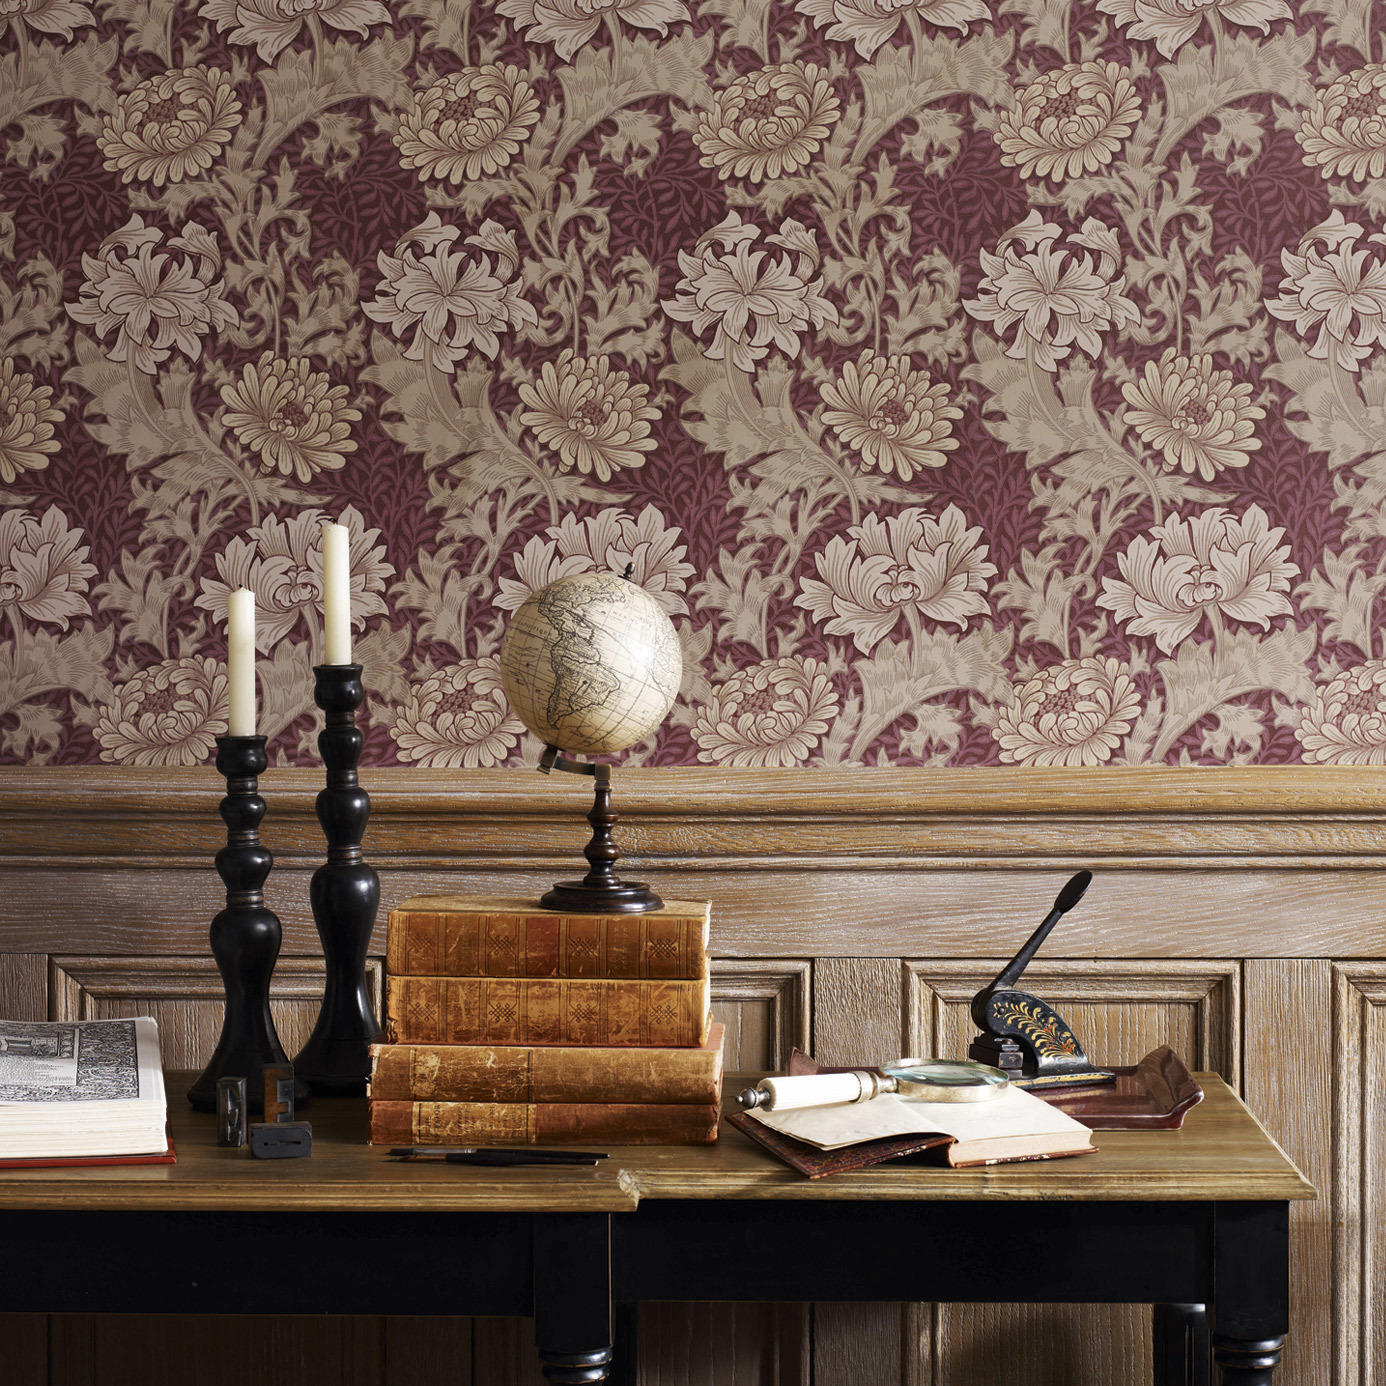 Chrysanthemum Toile Ivory/Gold Wallpaper by MOR